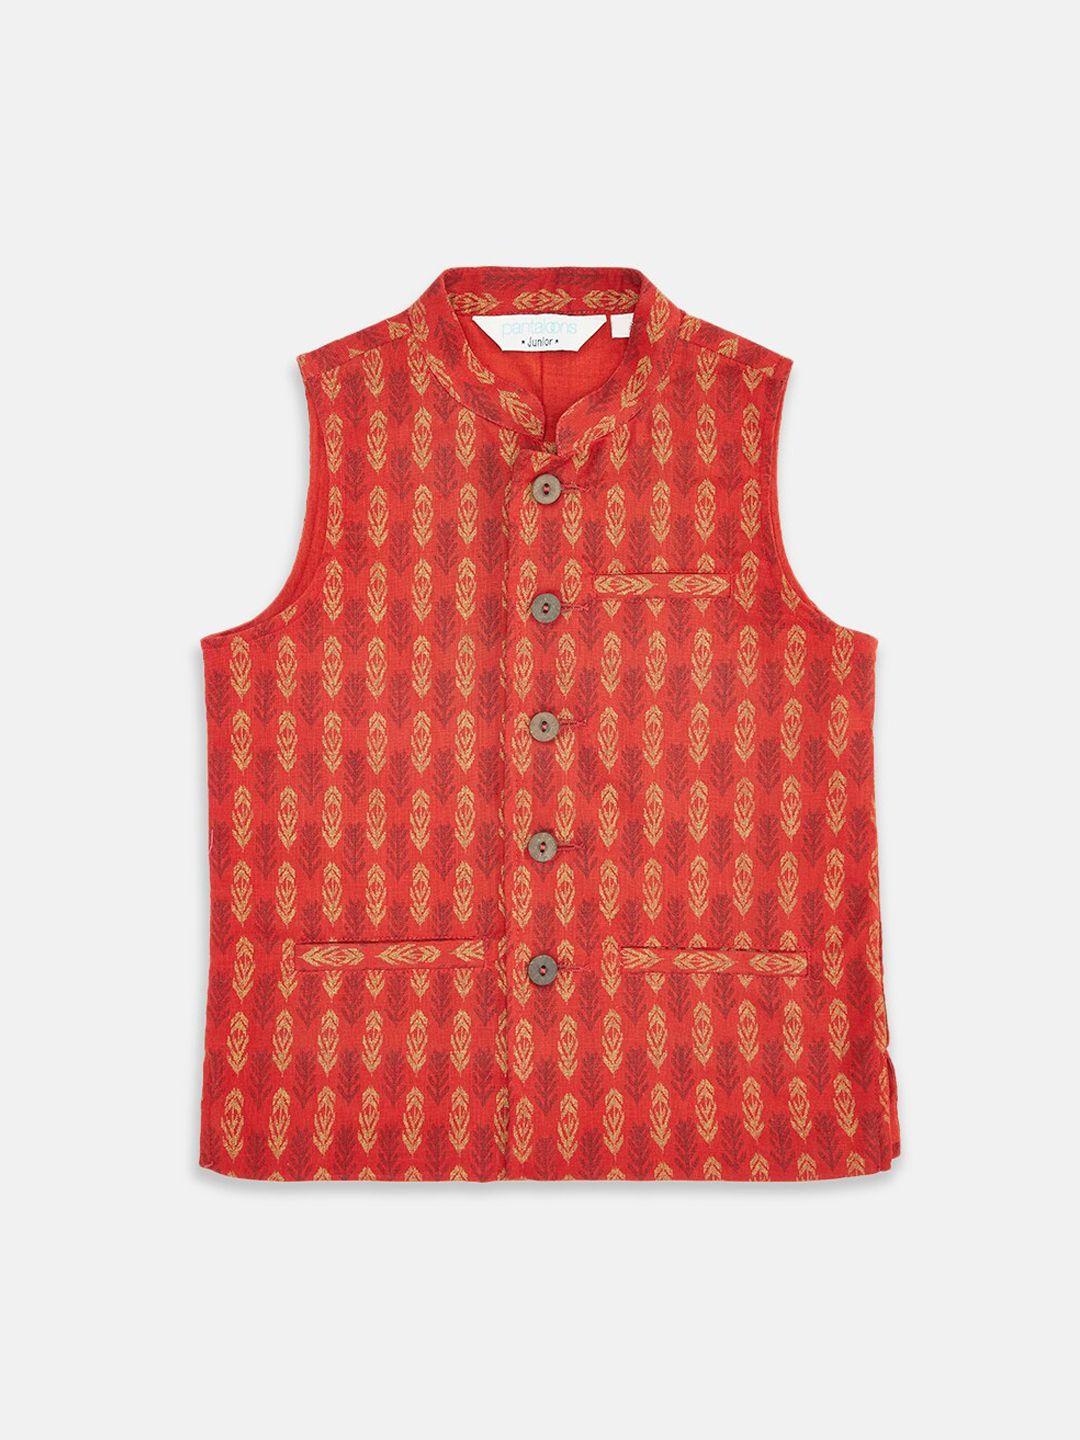 indus route by pantaloons boys rust red ethnic motifs printed nehru jacket